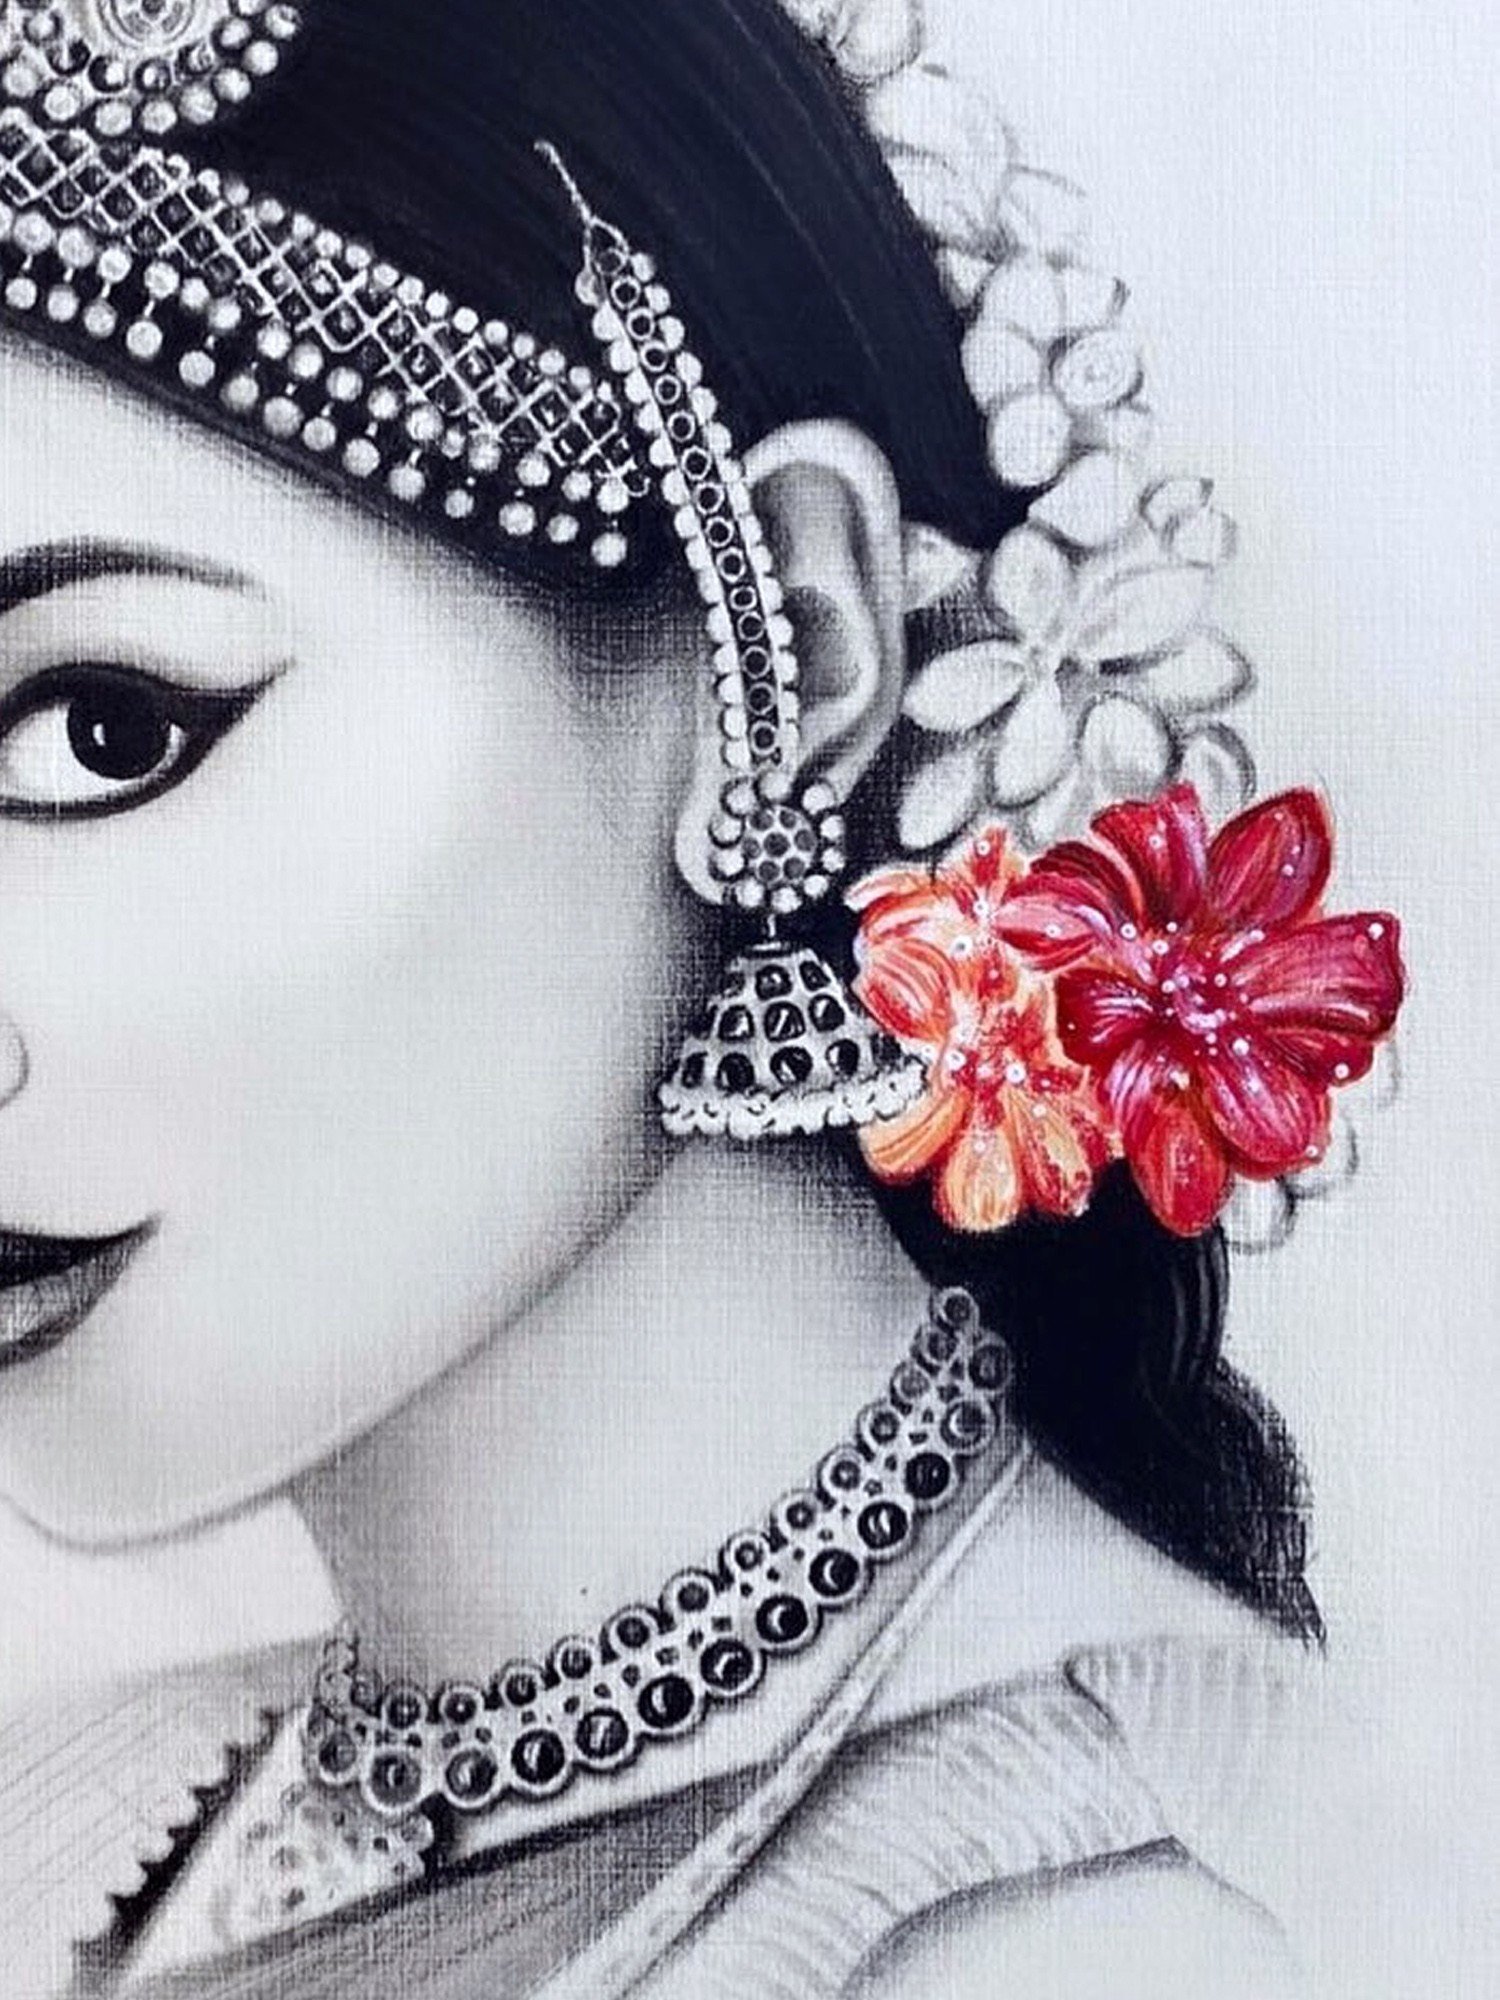 Indian Bride Greeting Card by Aamna Shaikh